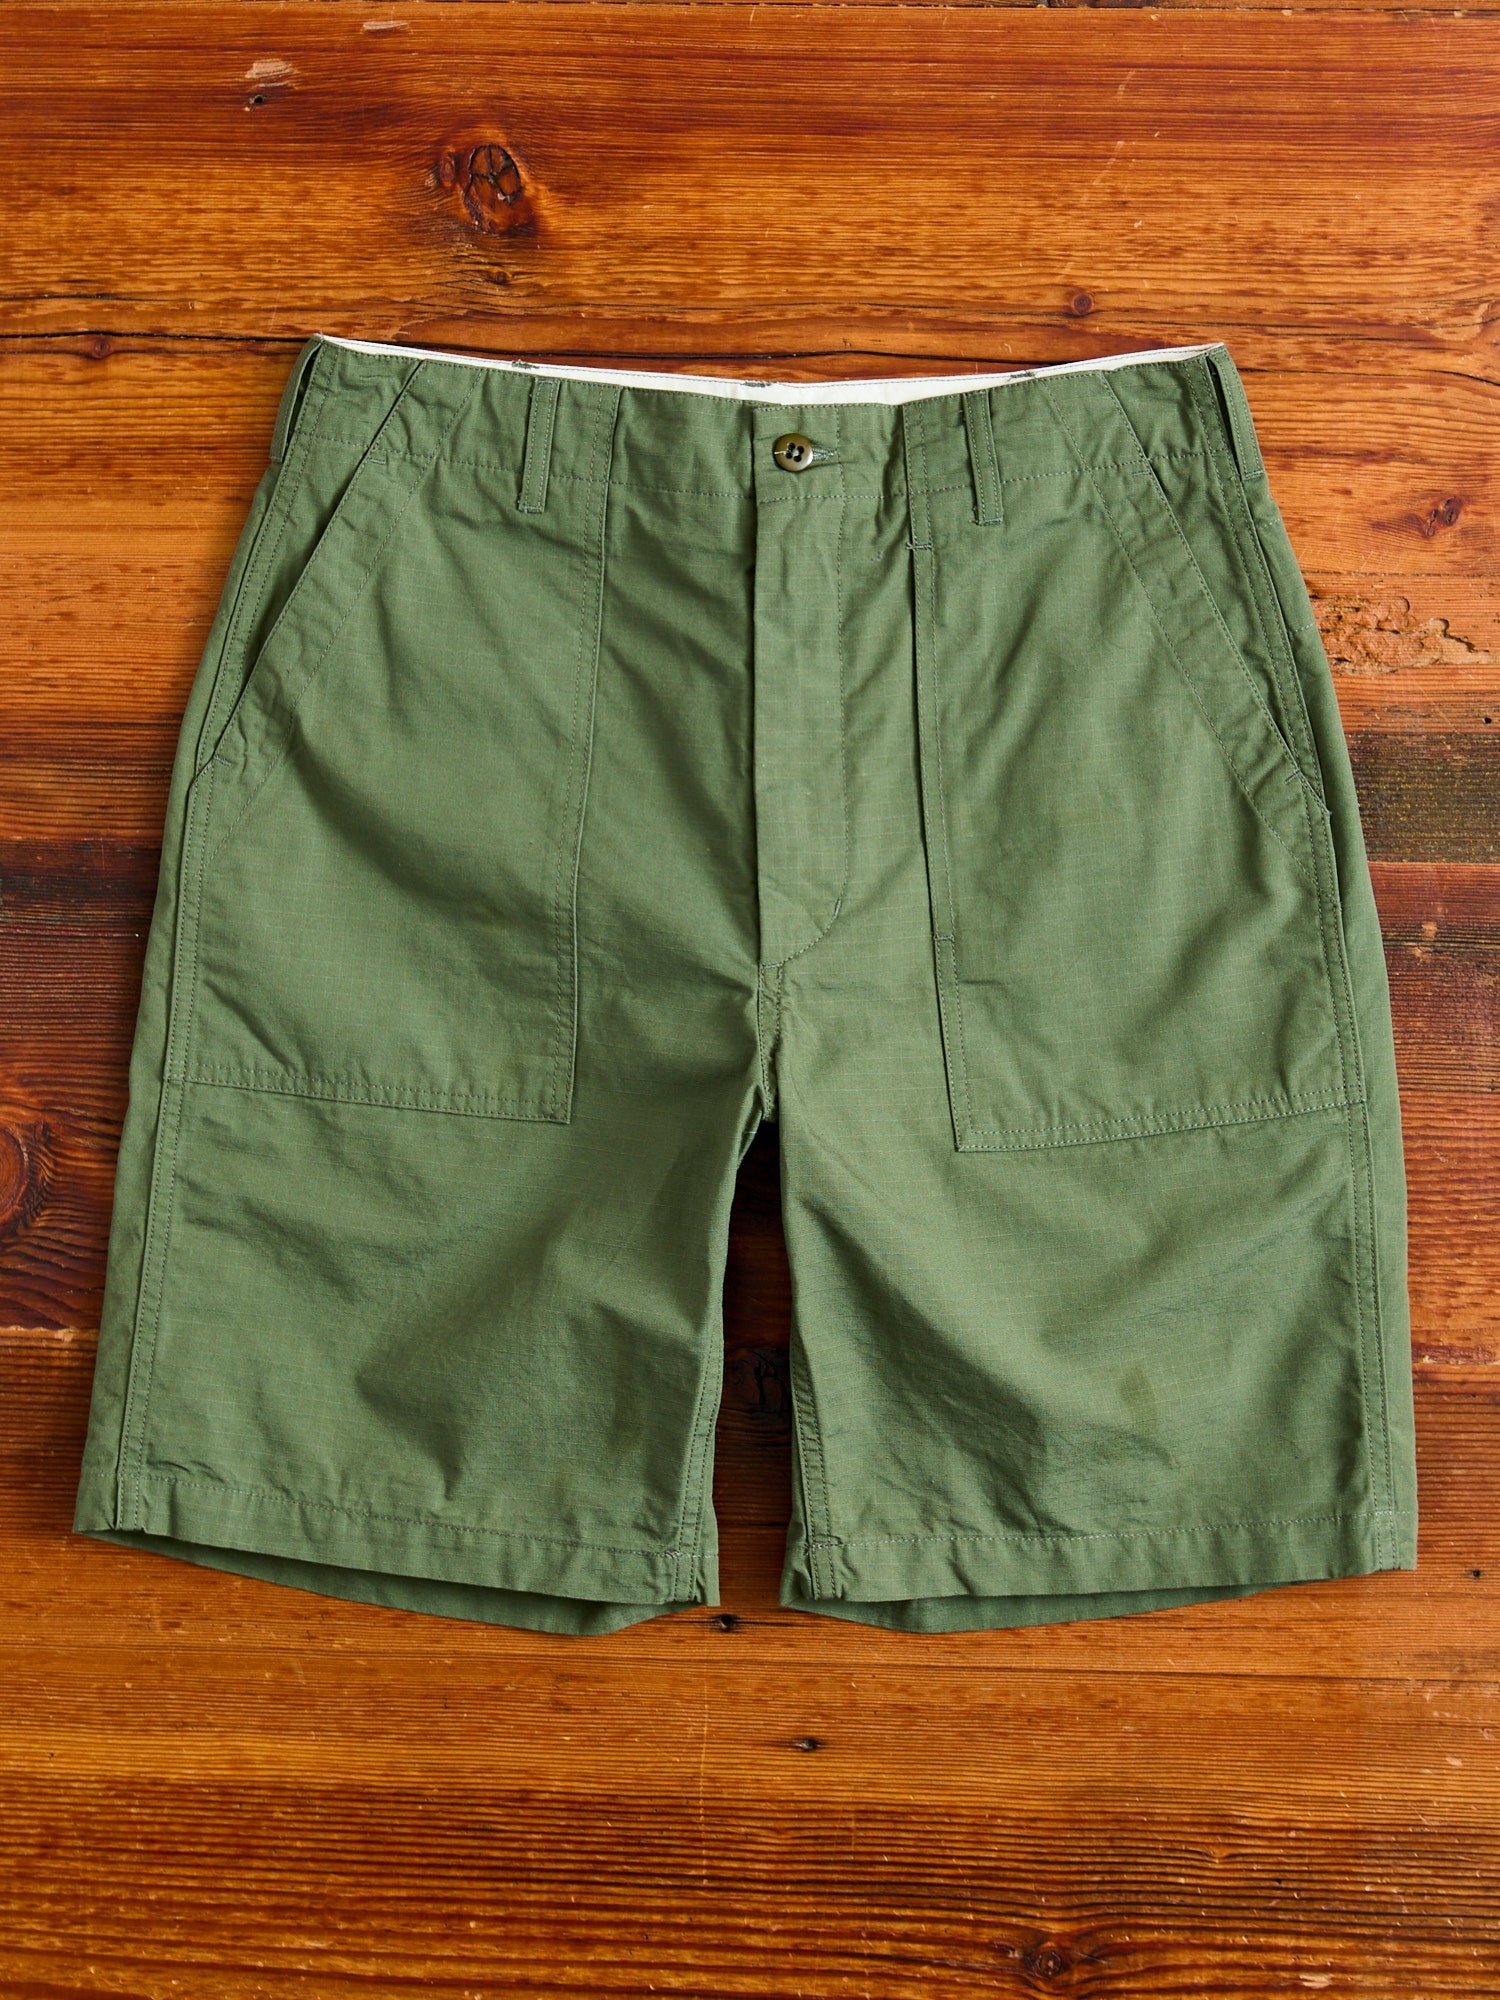 Fatigue Shorts in Olive Cotton Ripstop - 1